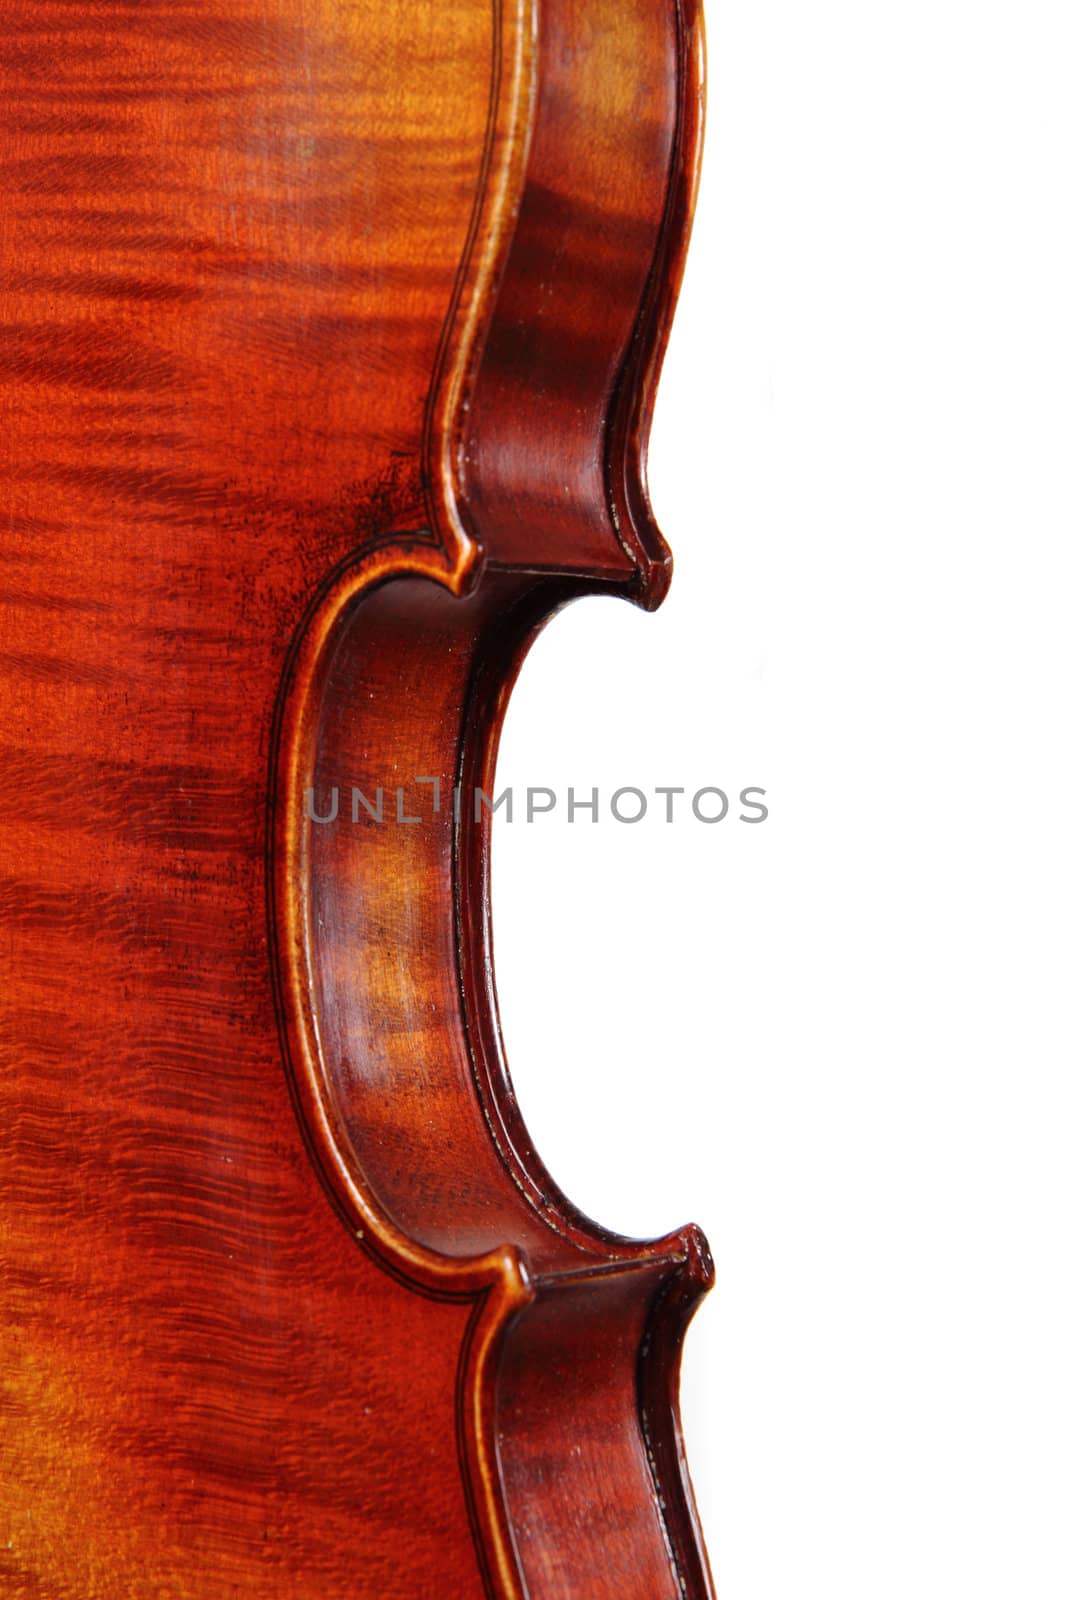 violin details isolated on the white background